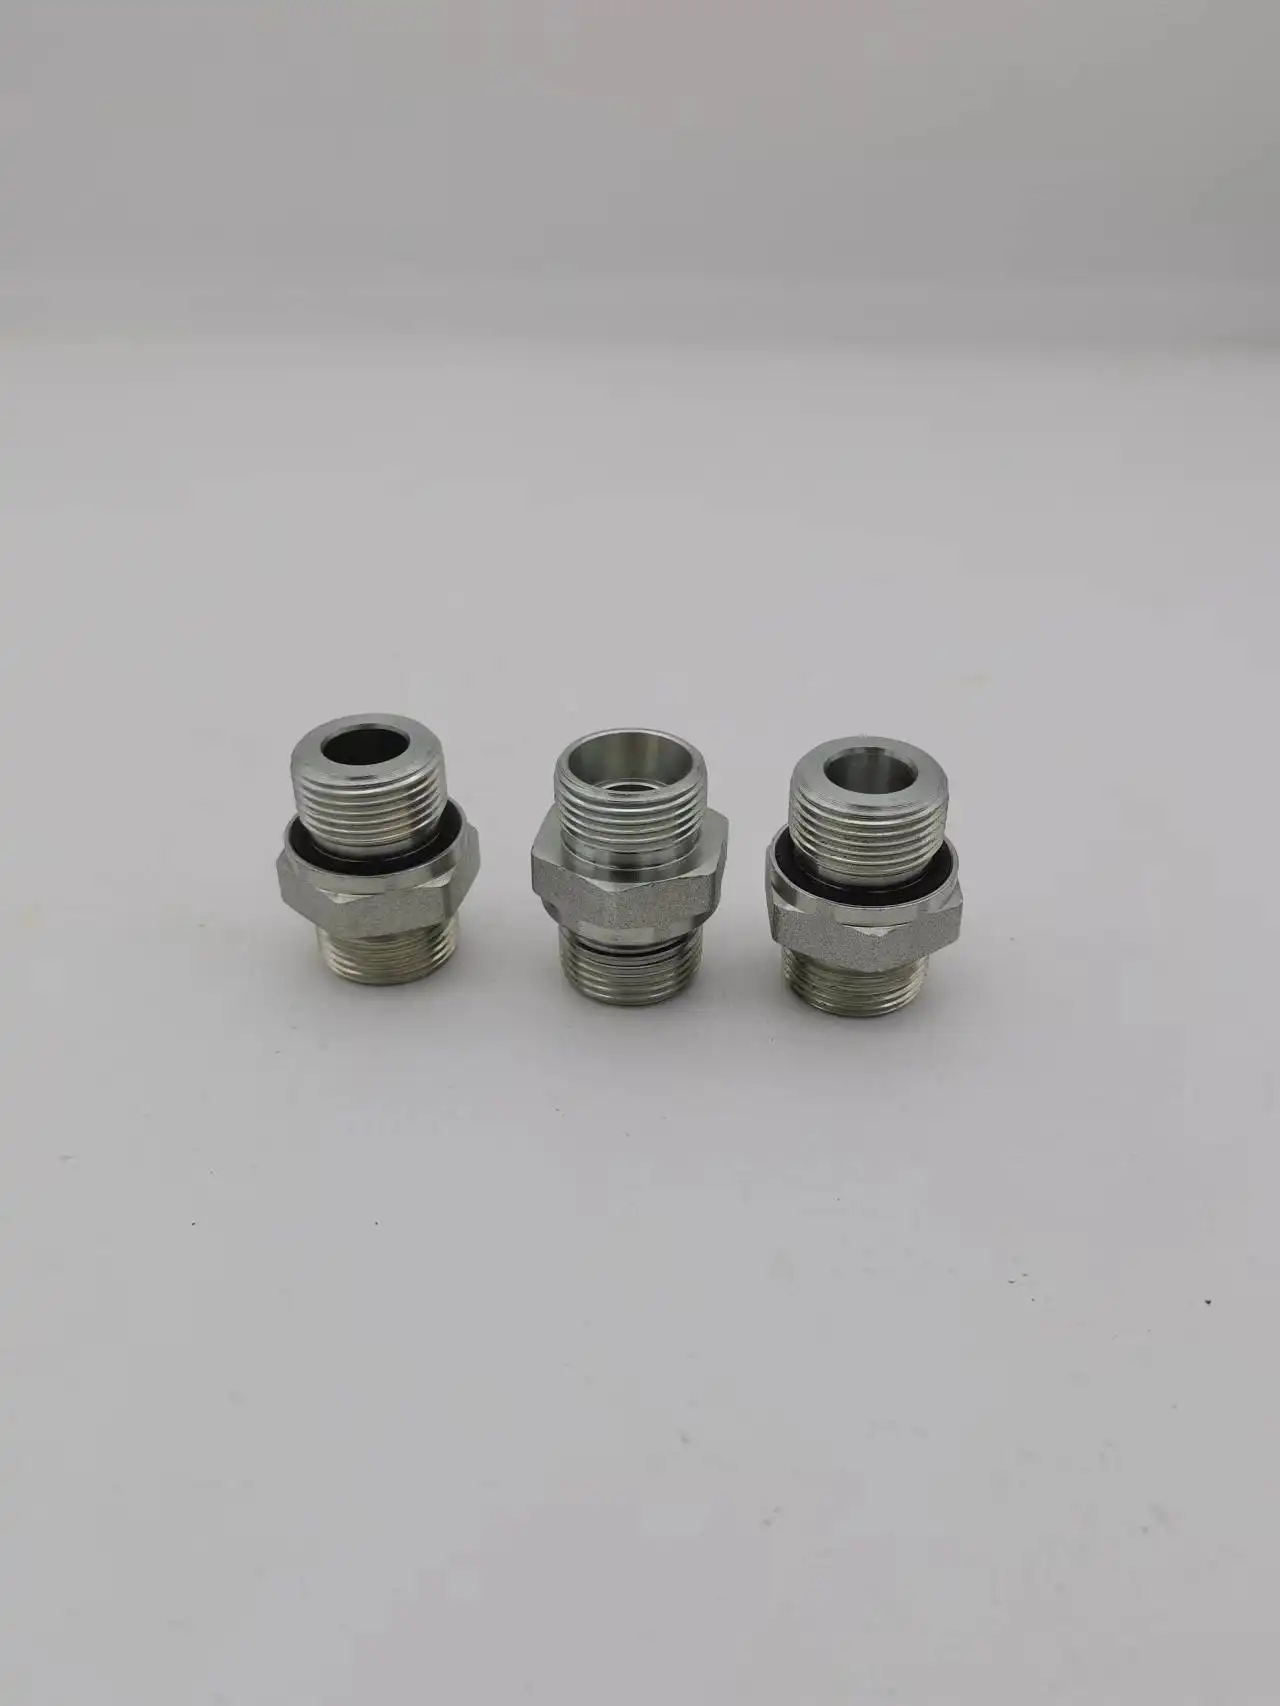 1Cb Light-Wd British G Thread With Seal Light-Weight Standard 24-Degree Cone Ferrule Transition Joint